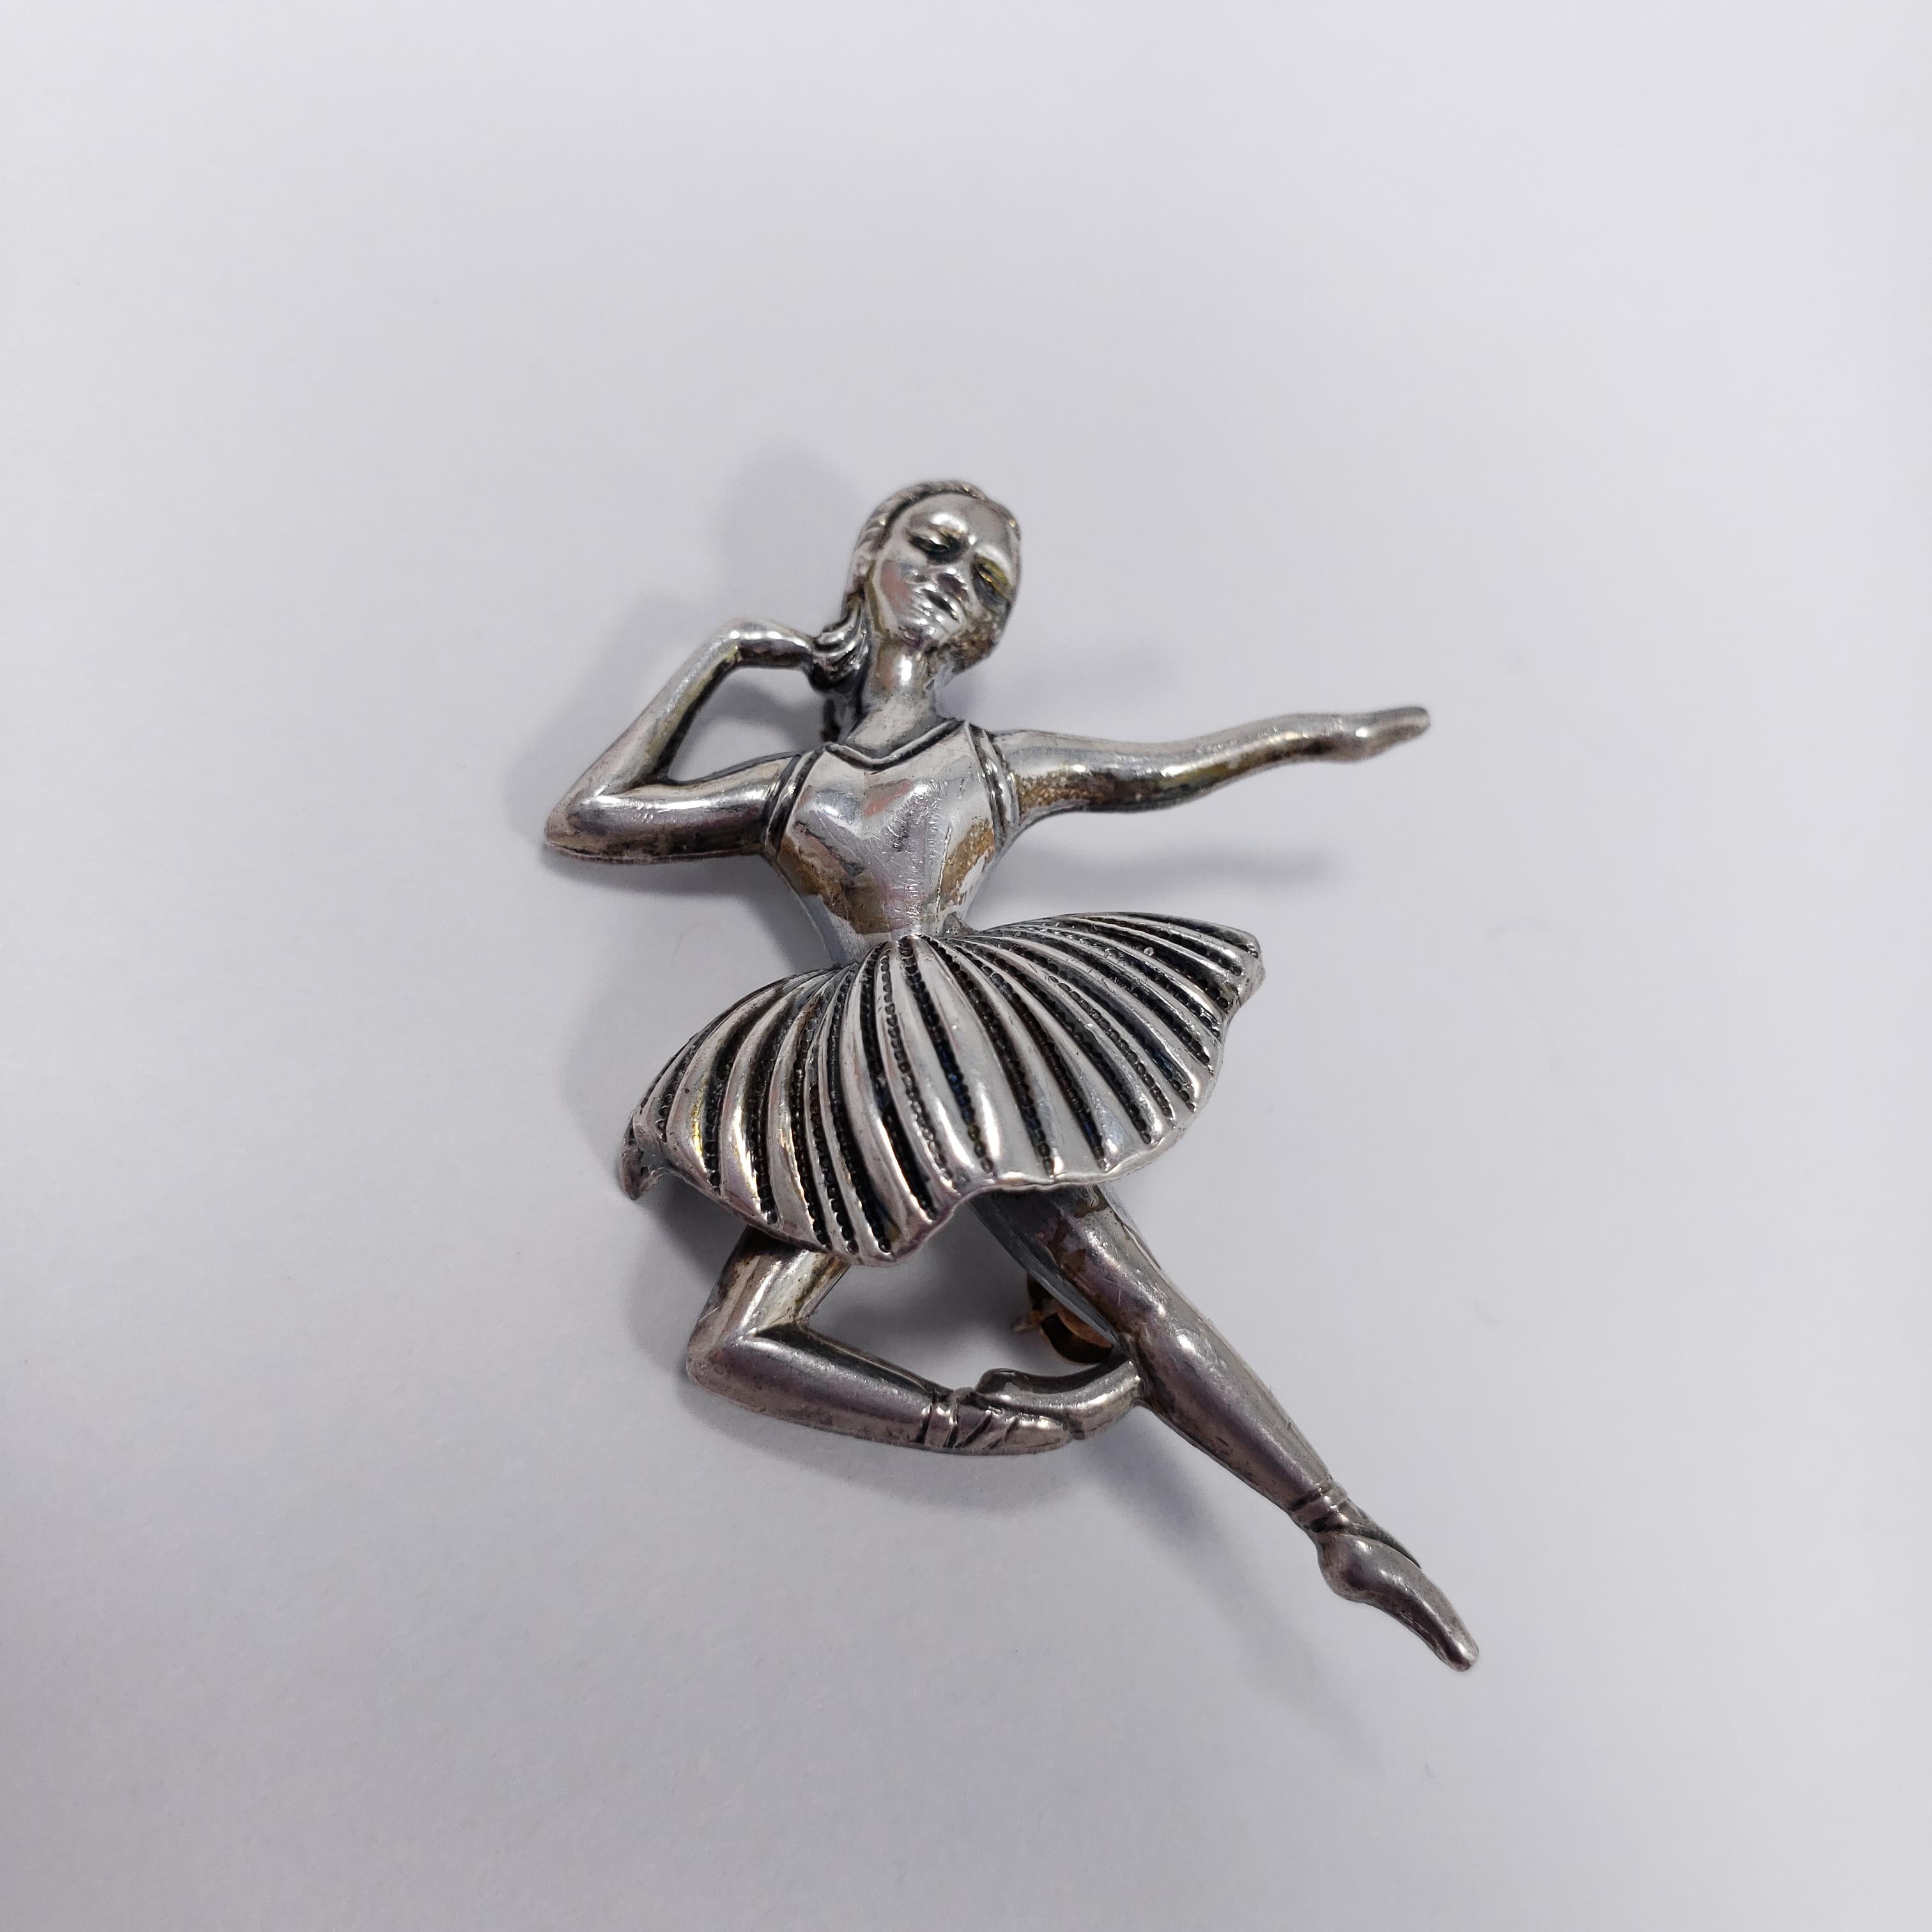 A dazzling vintage brooch, featuring a dancing ballerina in sterling silver. Excellent detail!

Hallmarks: Sterling